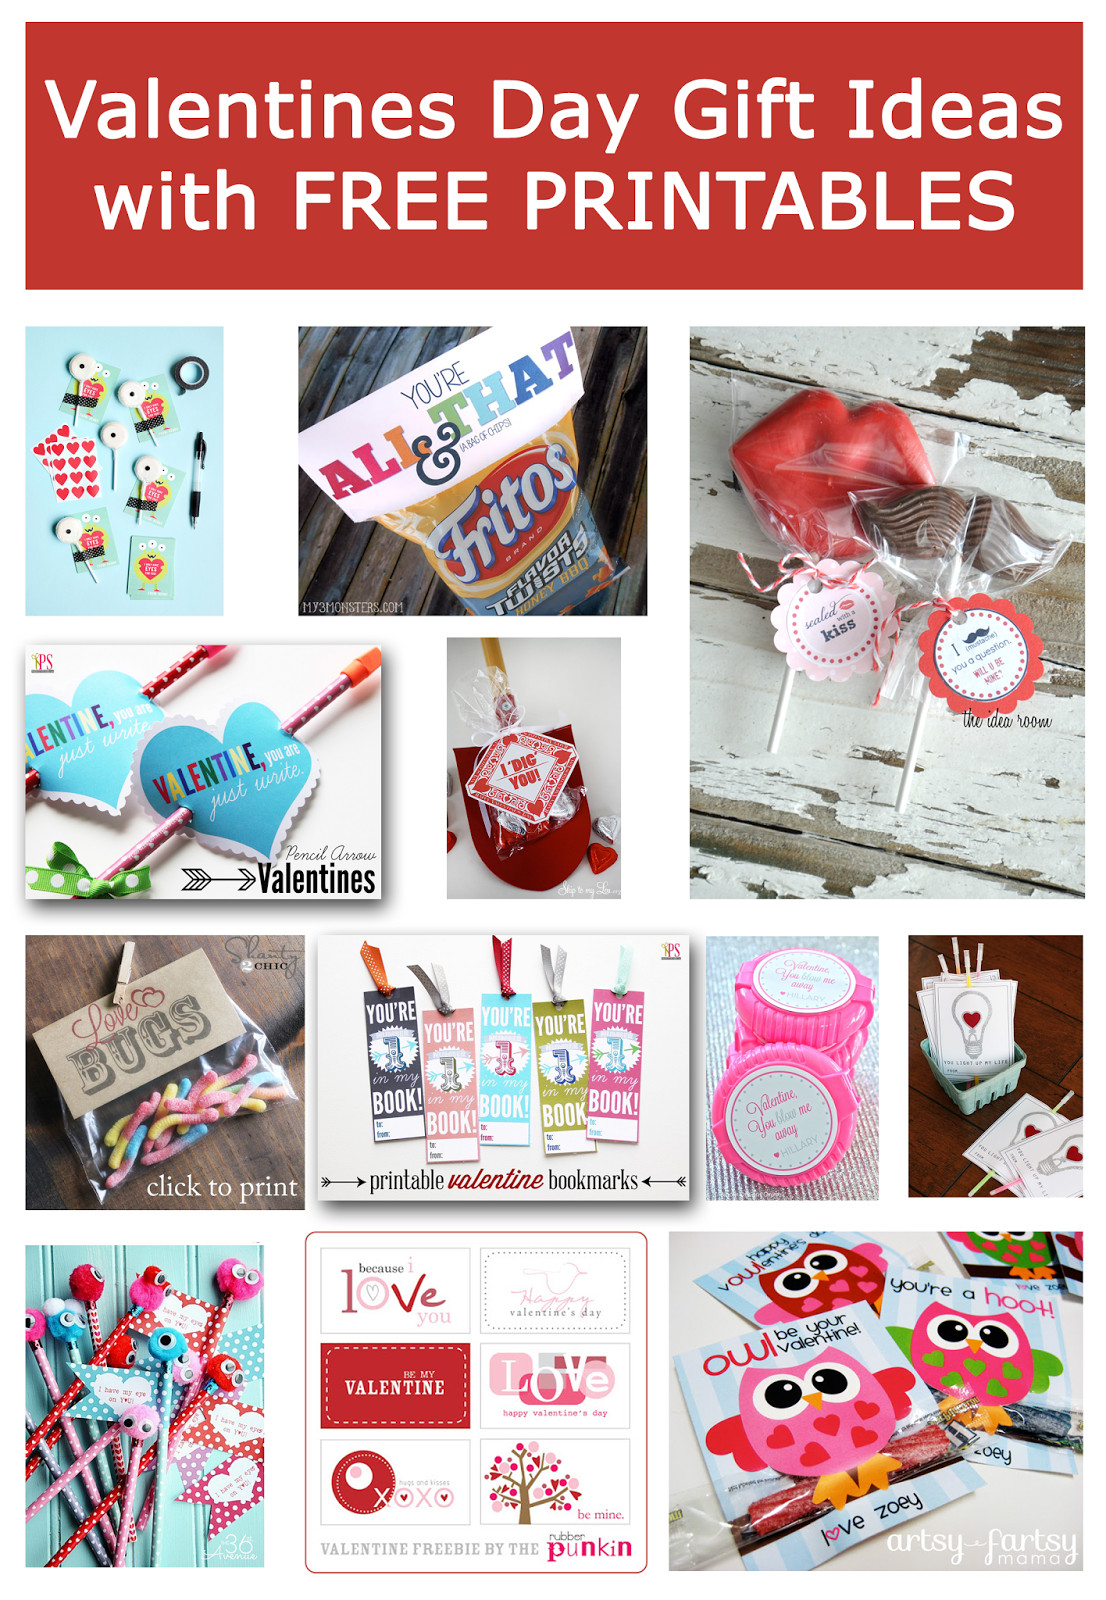 Free Valentine Gift Ideas
 Delightful Order Valentines Day Gift Ideas & Free Printables